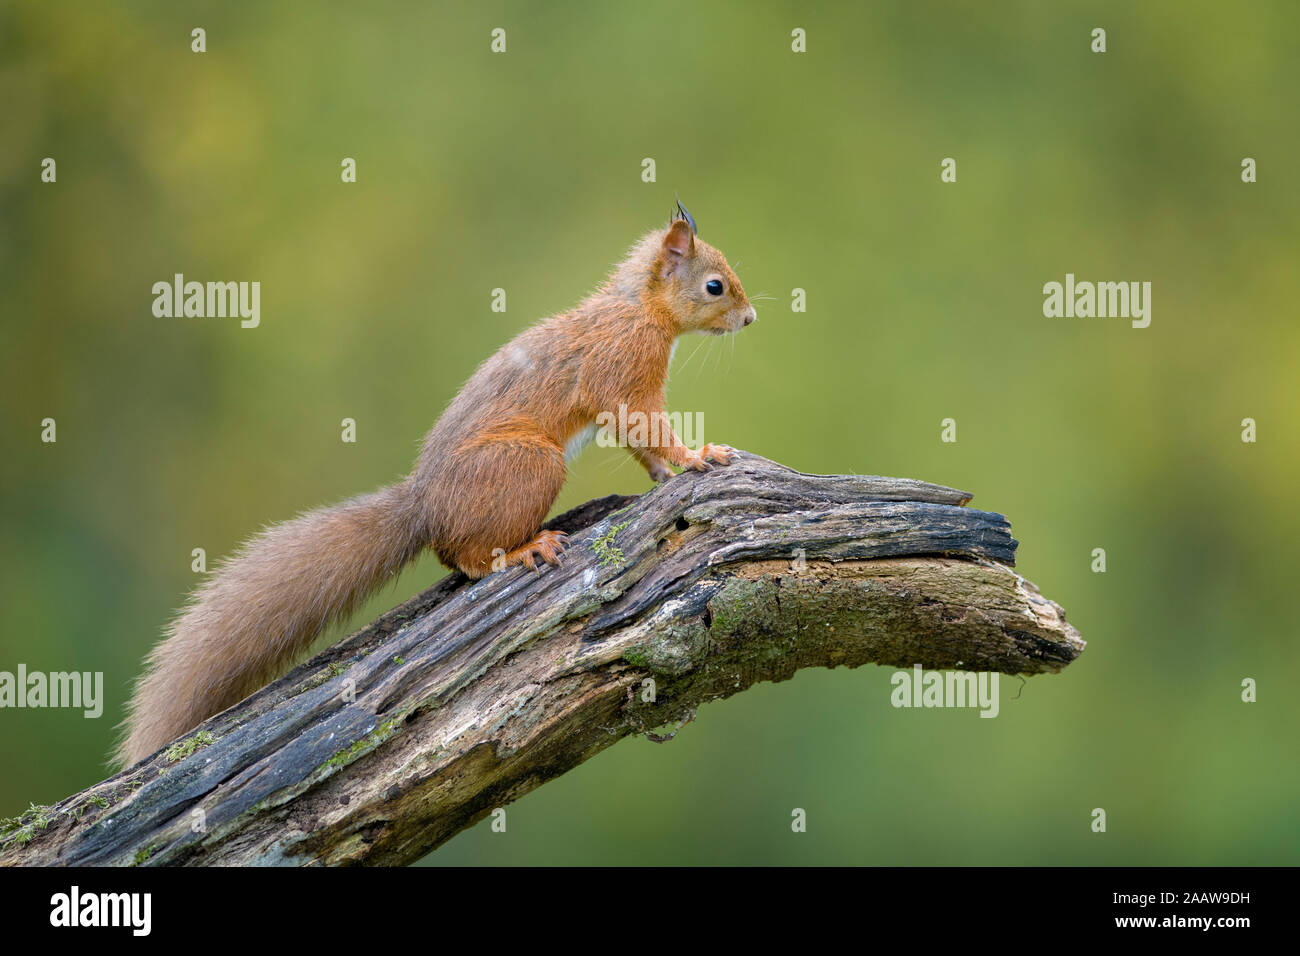 Red squirrel sitting on tree trunk Stock Photo